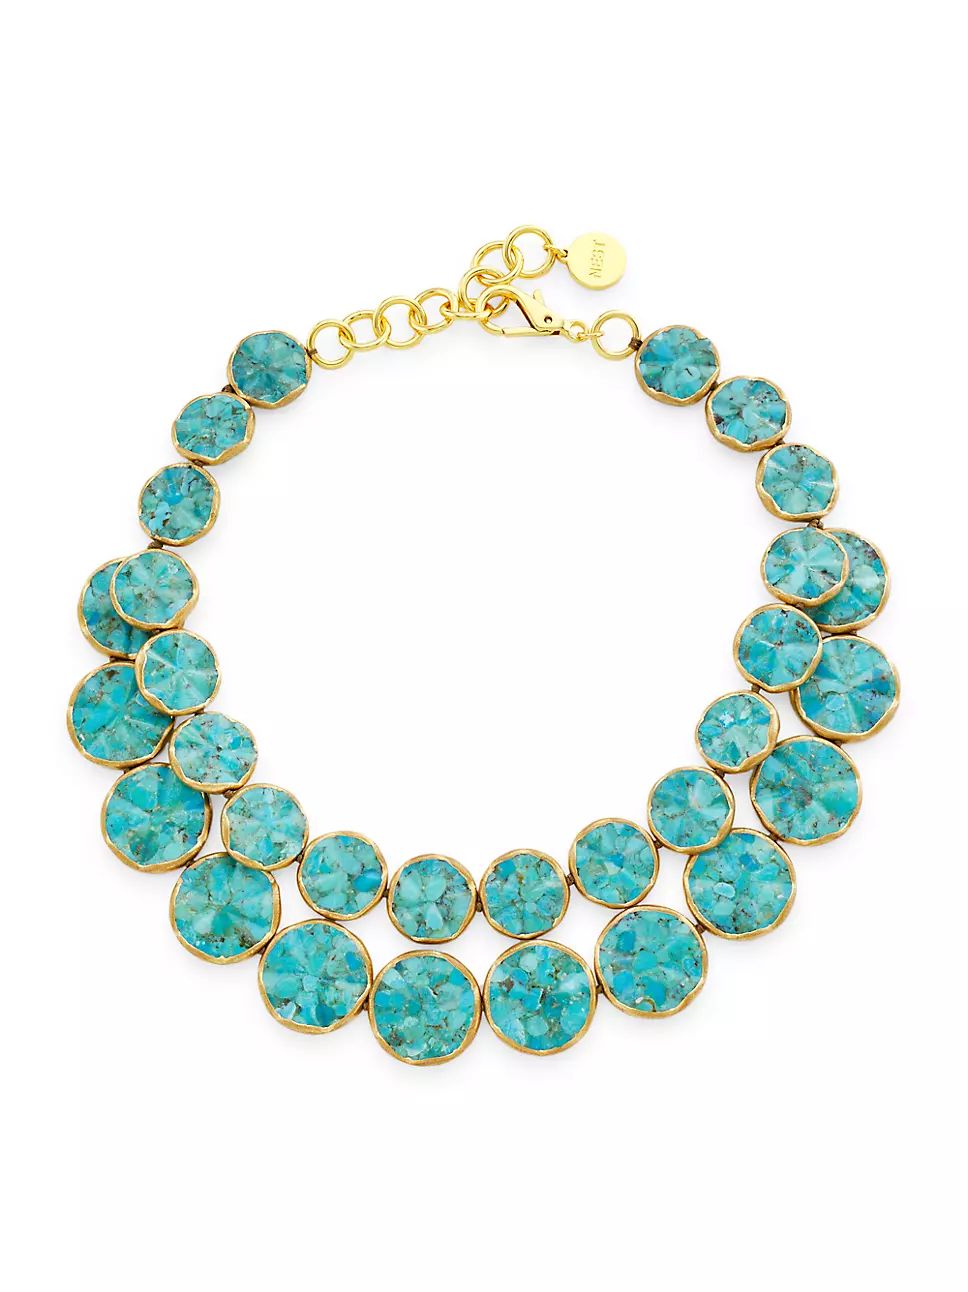 NEST Jewelry 22K Gold-Plated & Turquoise Wavy Statement Necklace | Saks Fifth Avenue